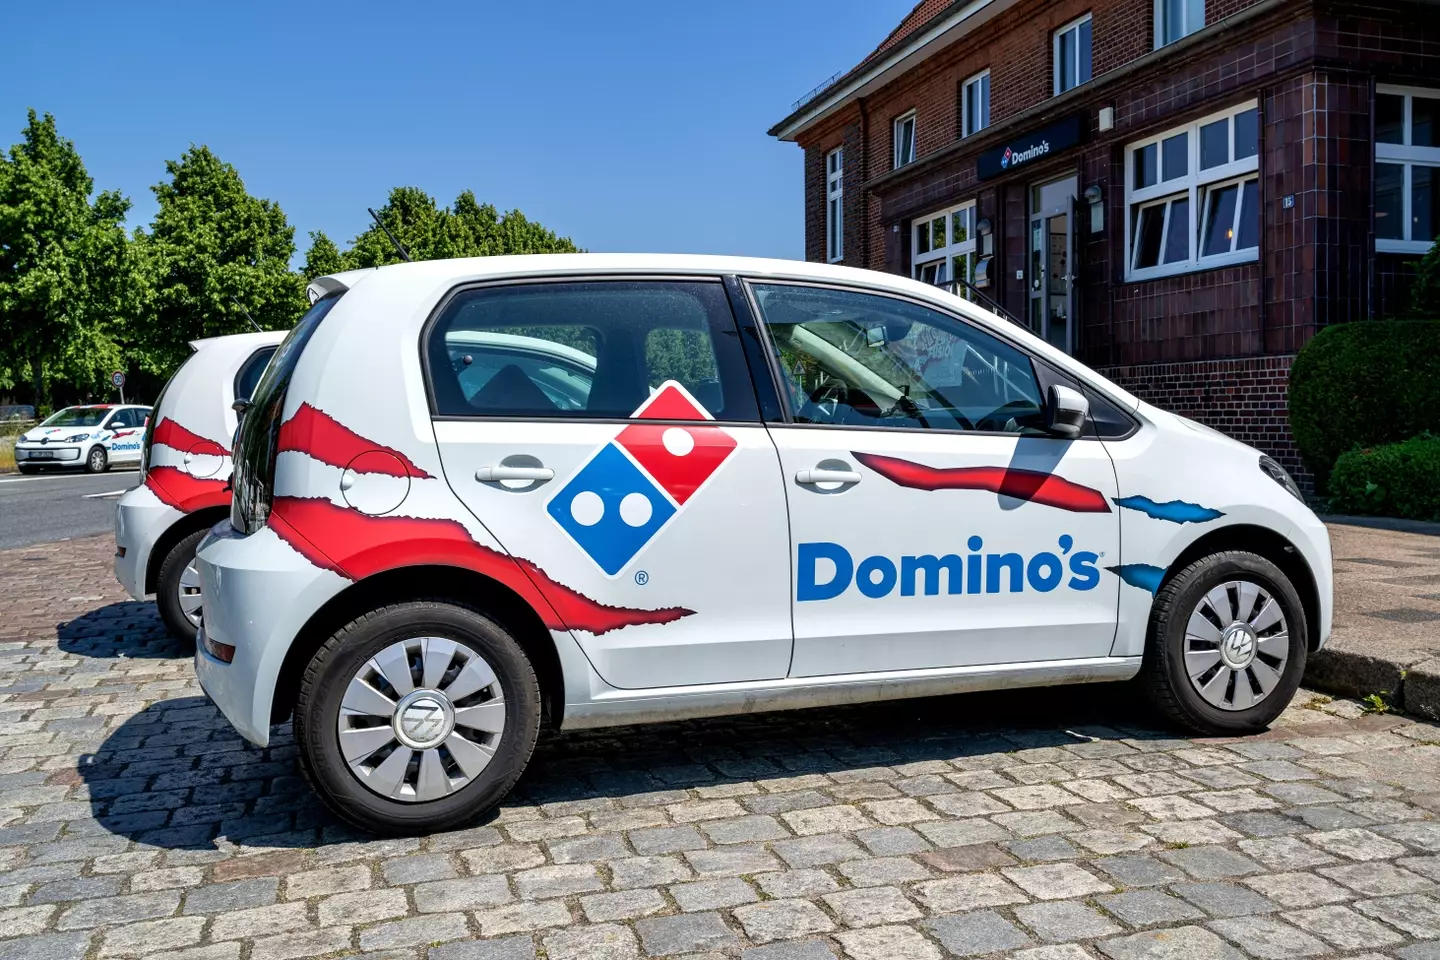 People were shocked at how little Domino's delivery drivers are tipped.